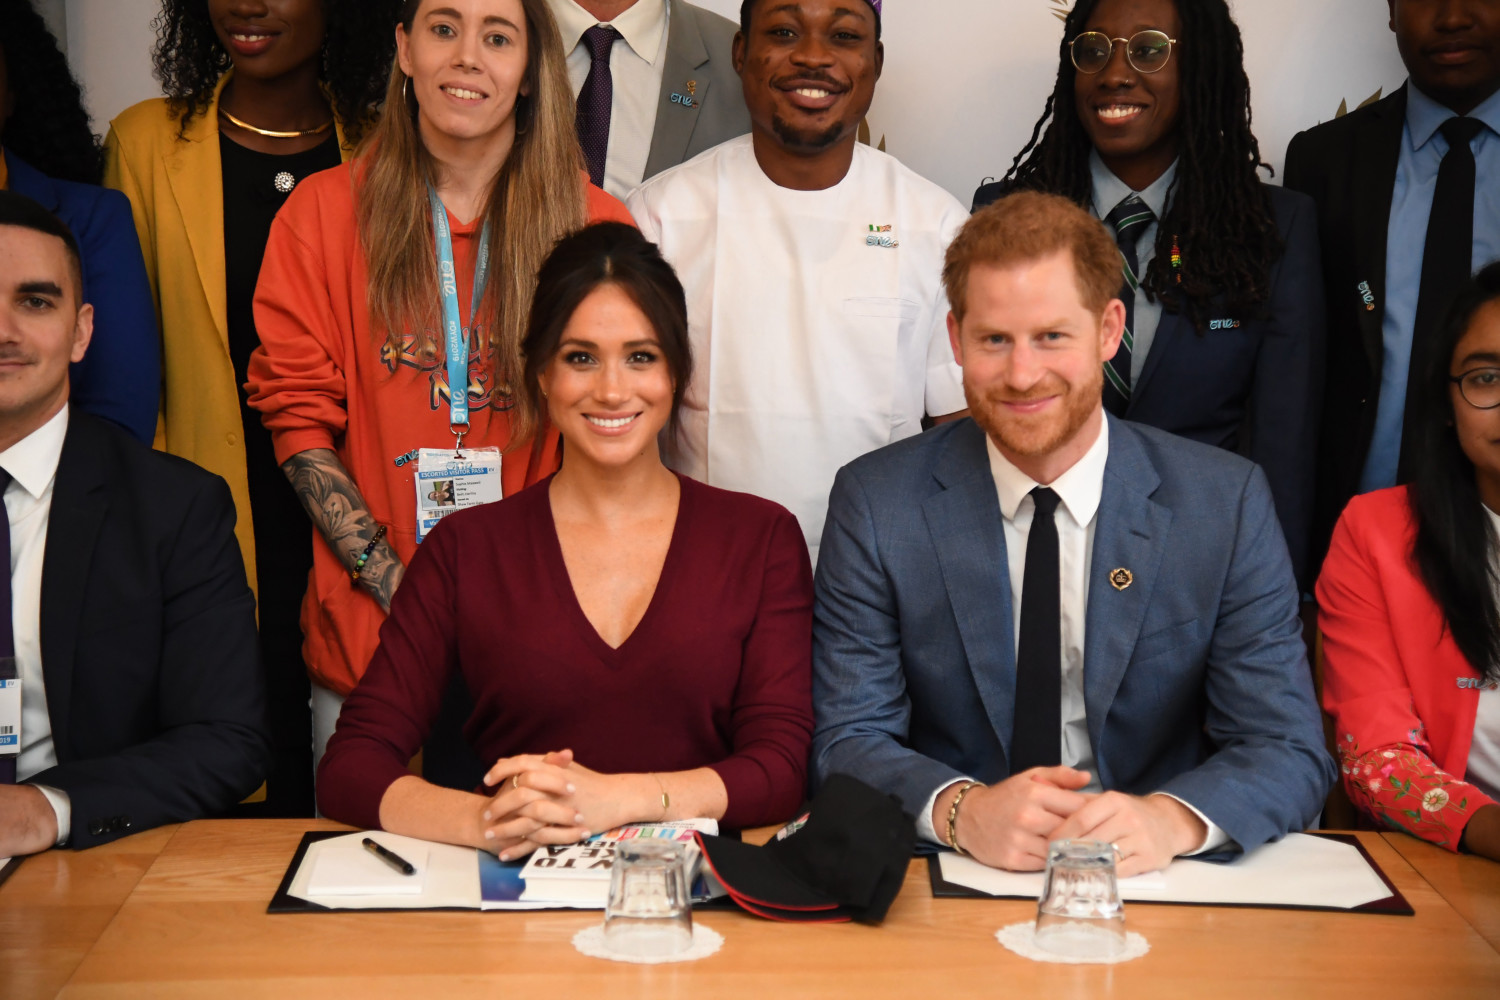 The Duke & Duchess of Sussex Attend a Roundtable Discussion on Gender Equality with The Queens Commonwealth Trust